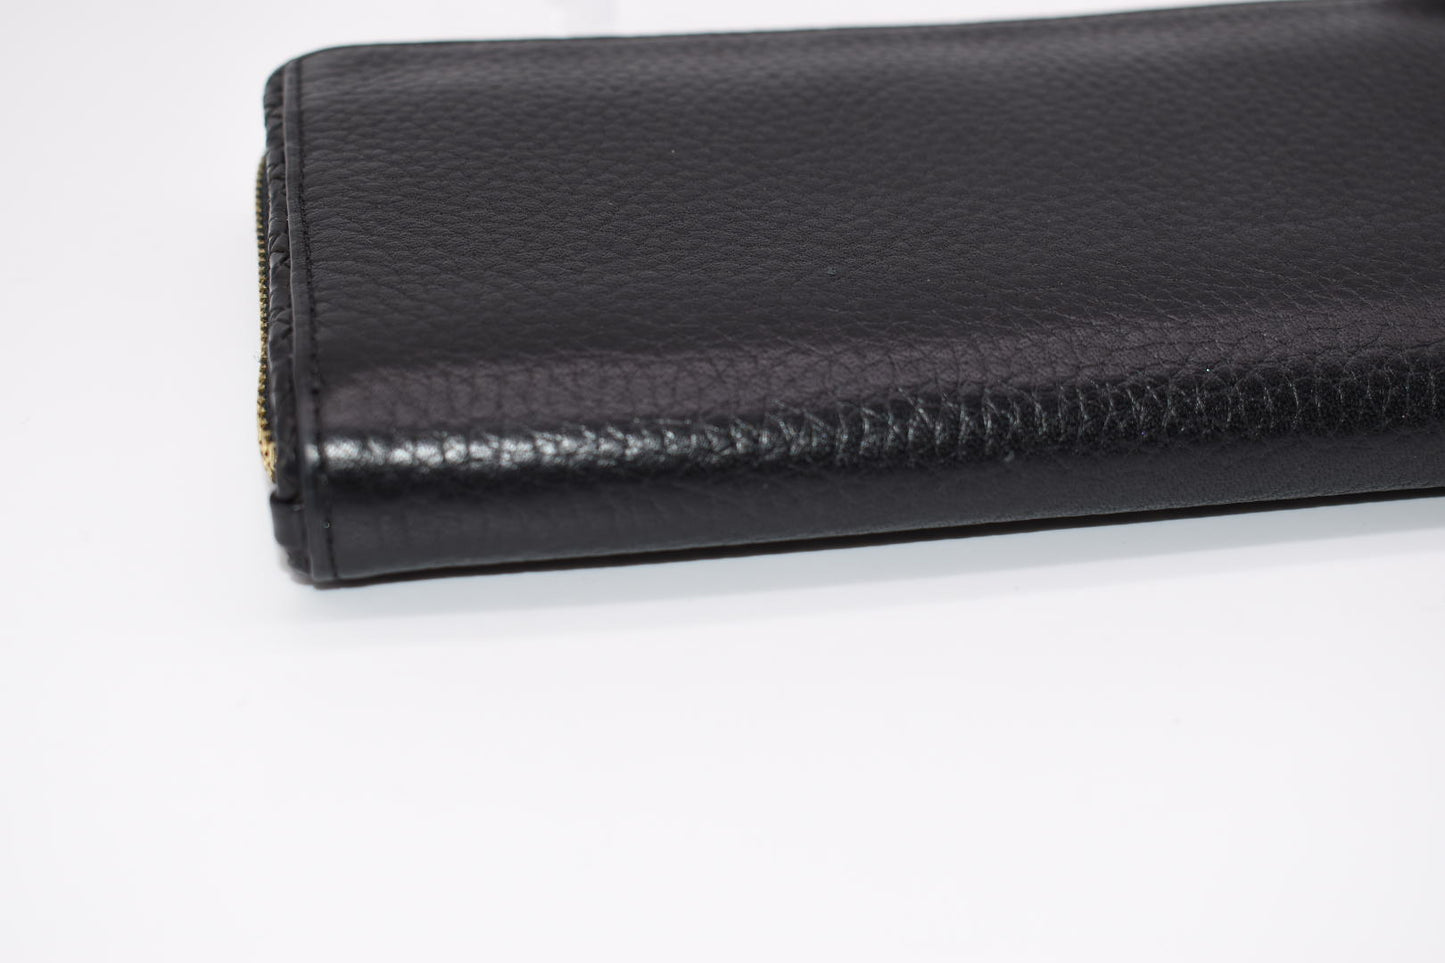 Tory Burch Taylor Zip Continental Wallet in Black